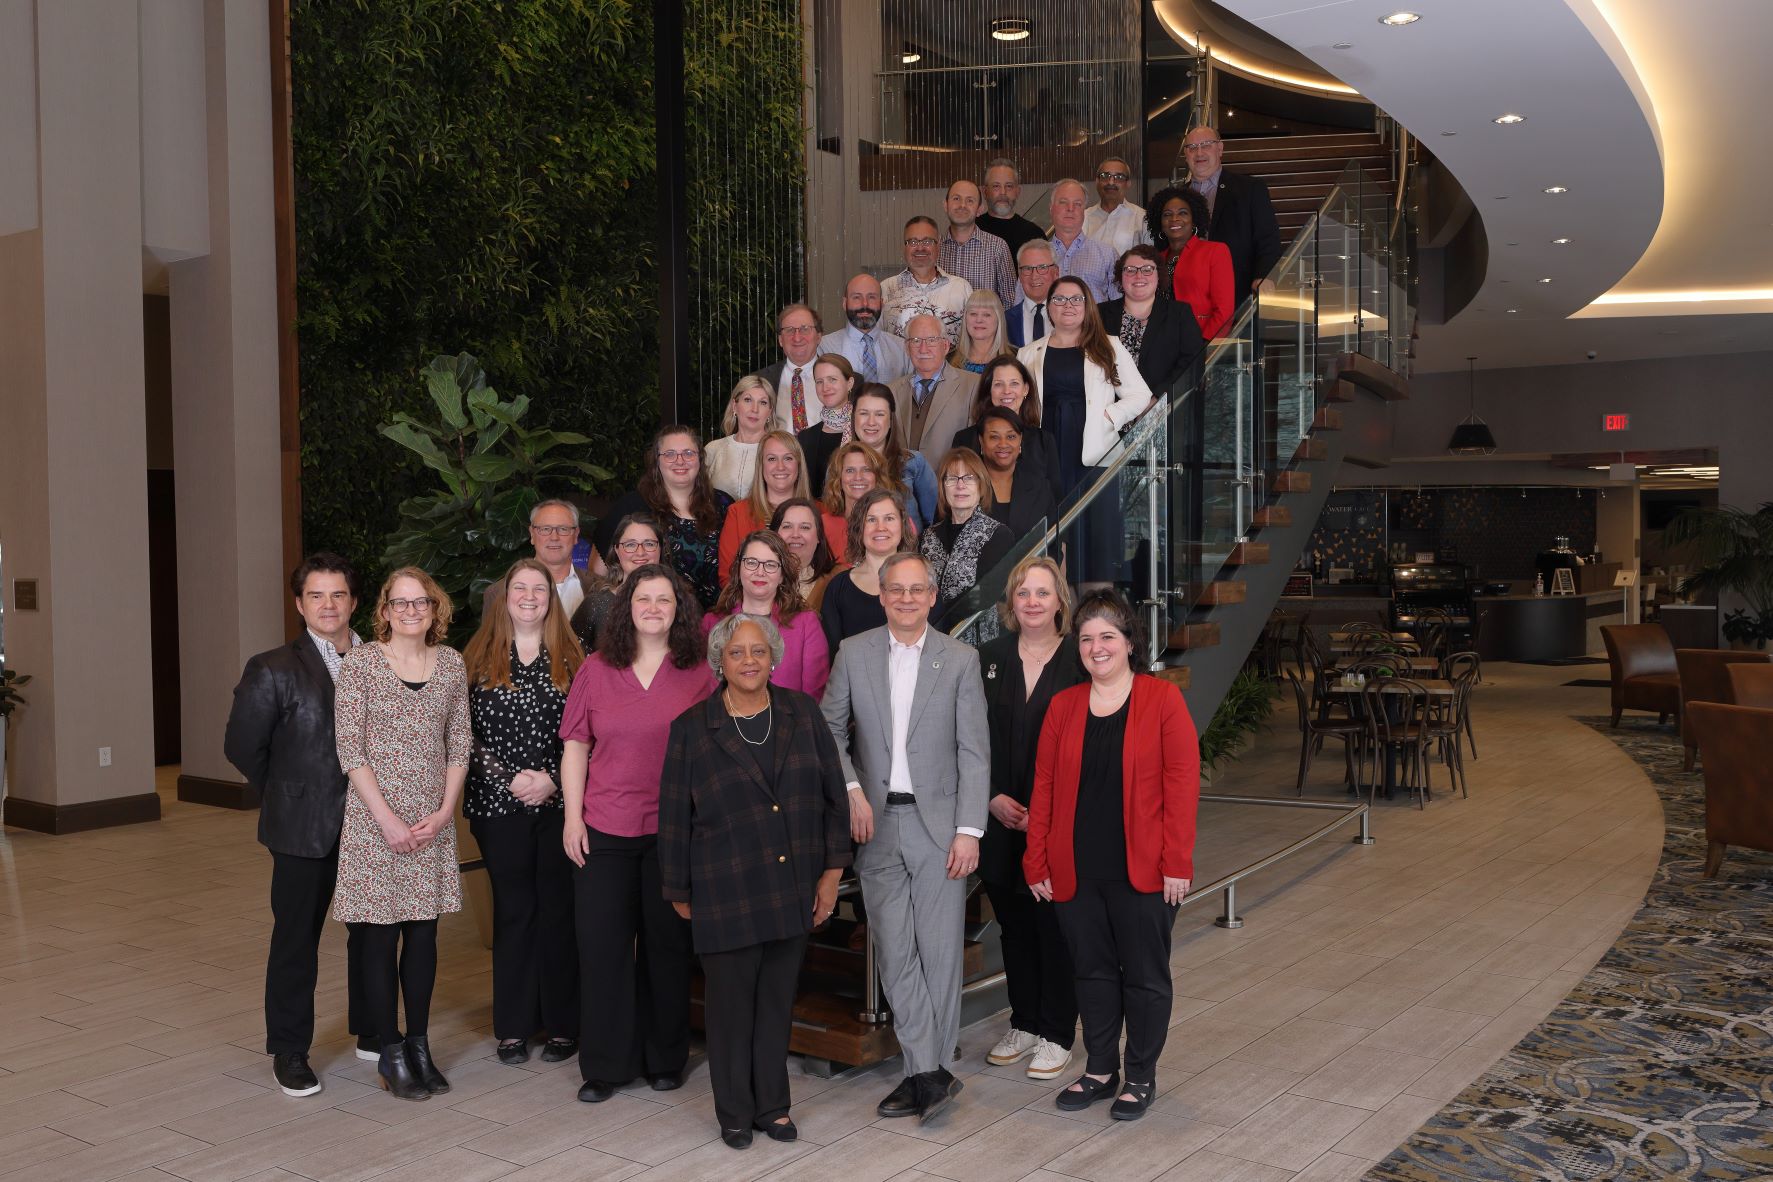 LCME workgroup members group photo.